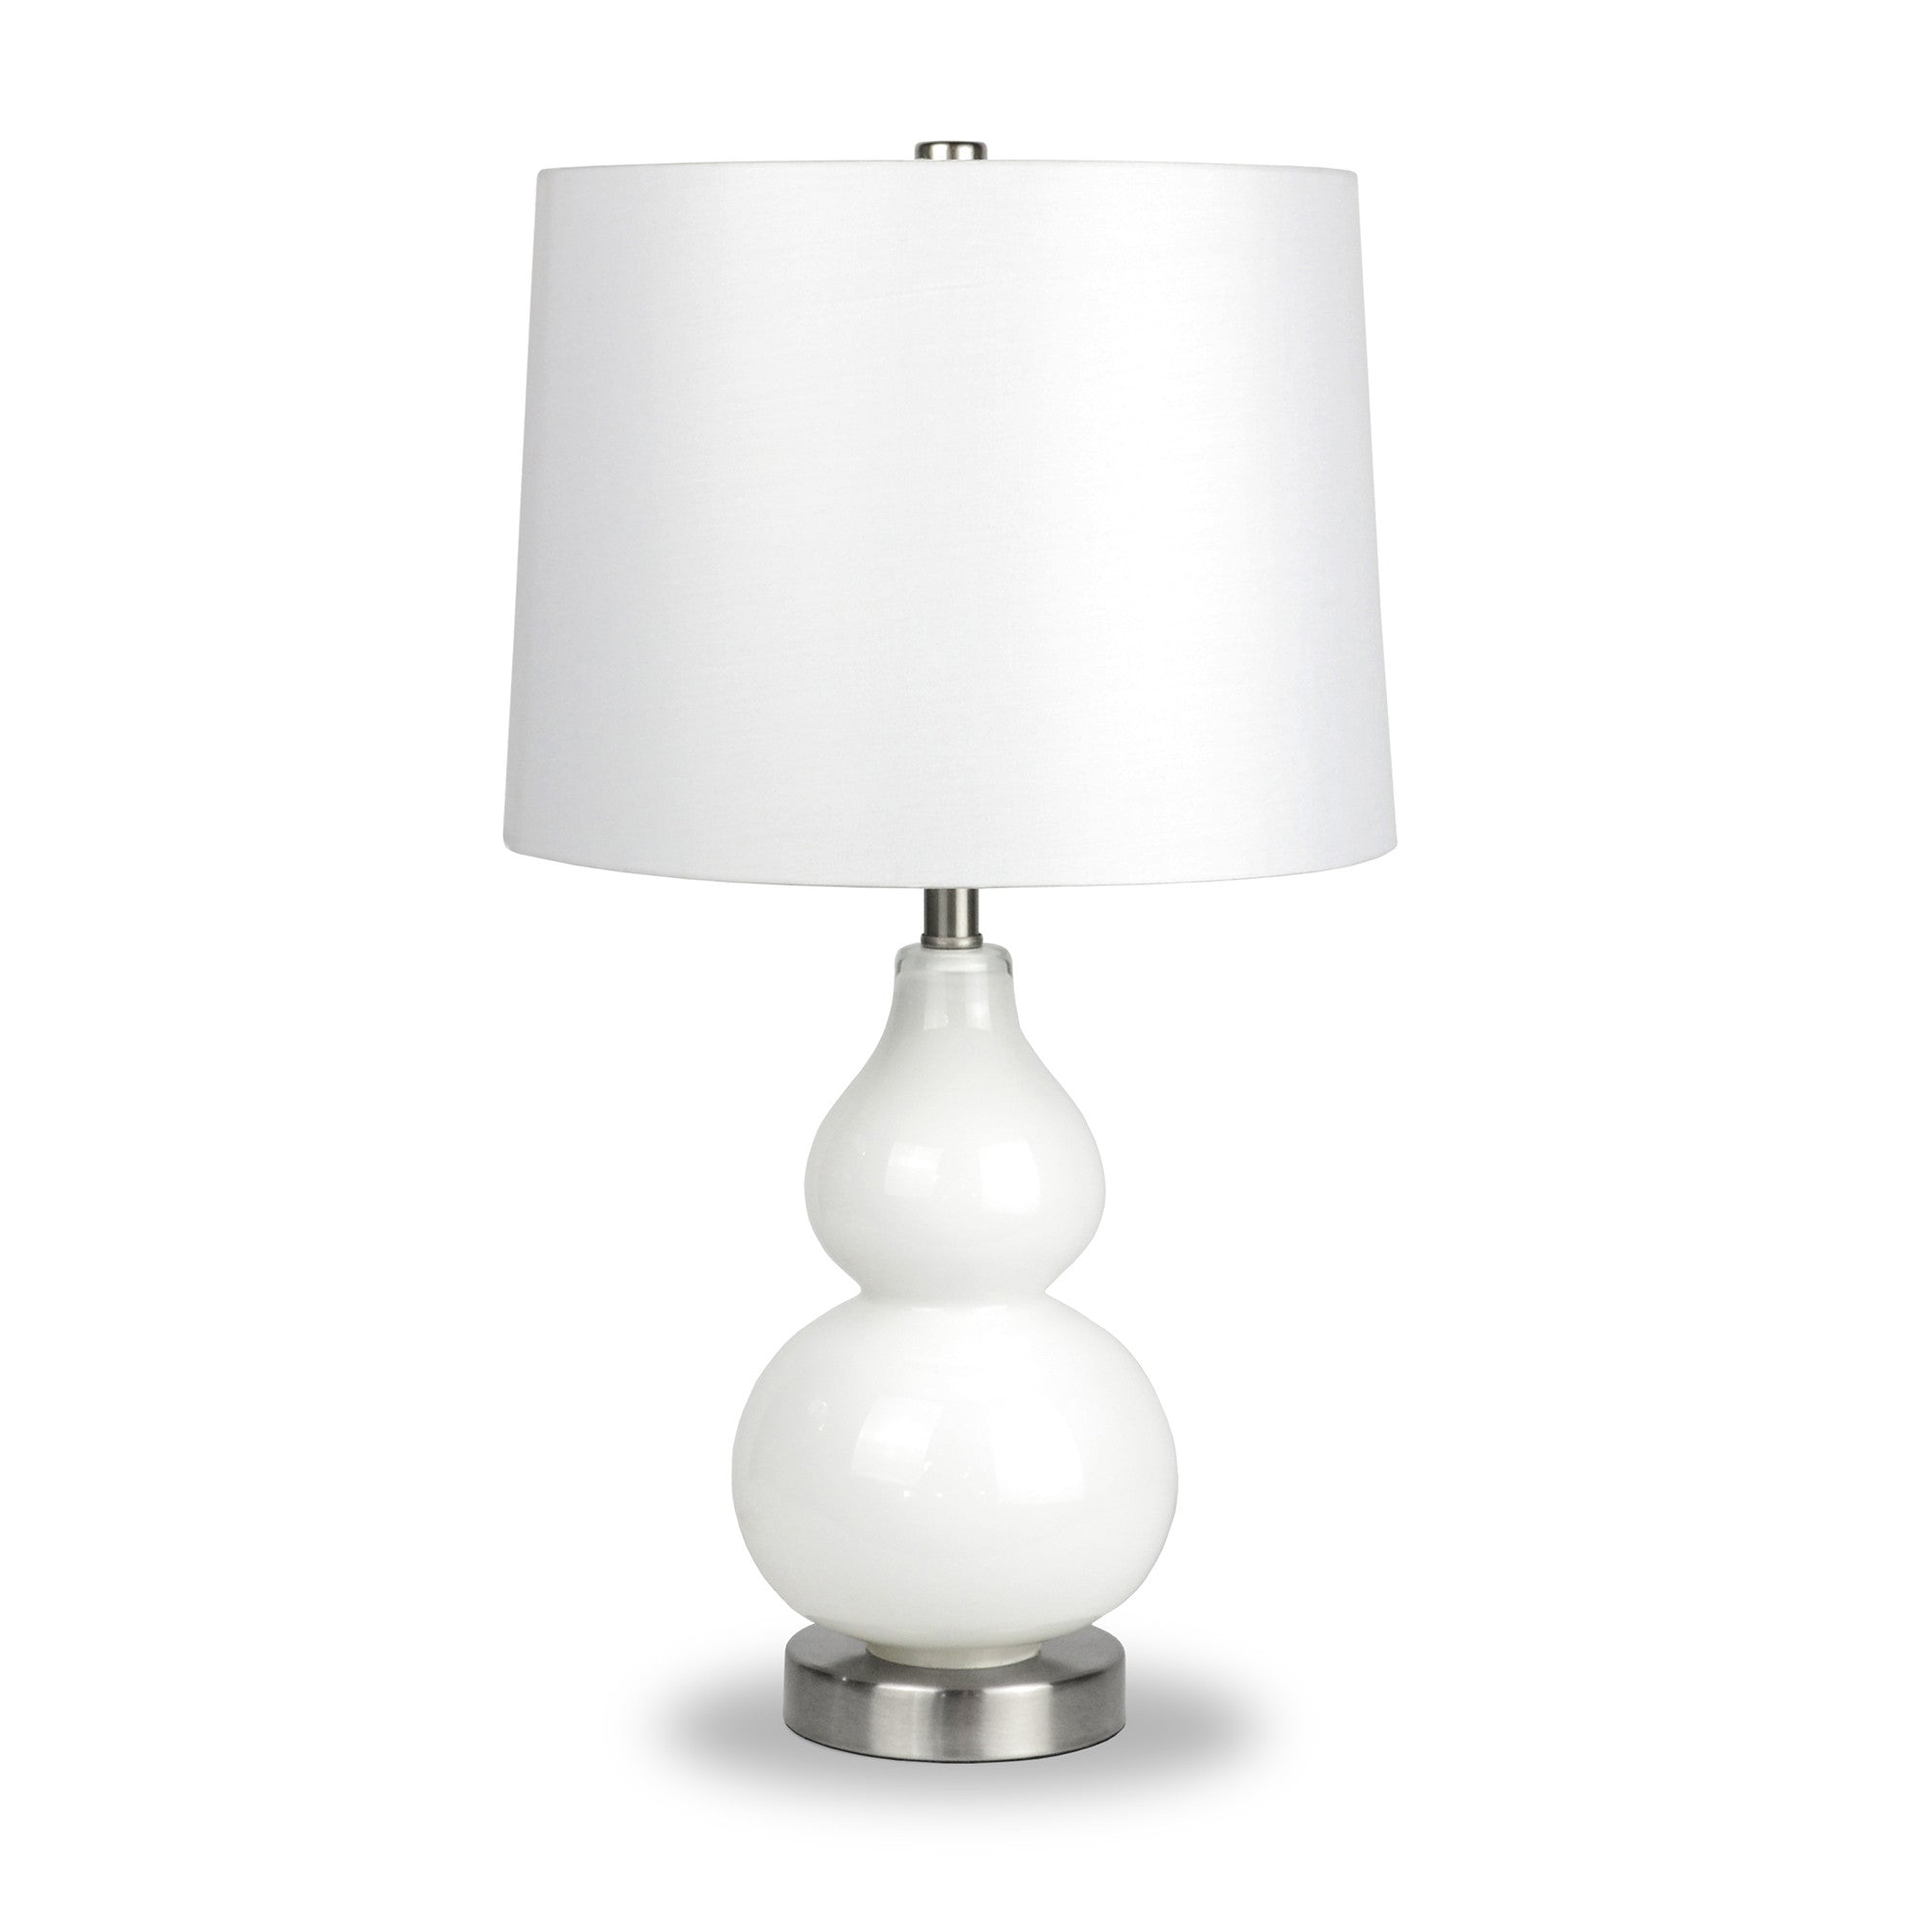 21" White and Silver Glass Table Lamp With White Drum Shade